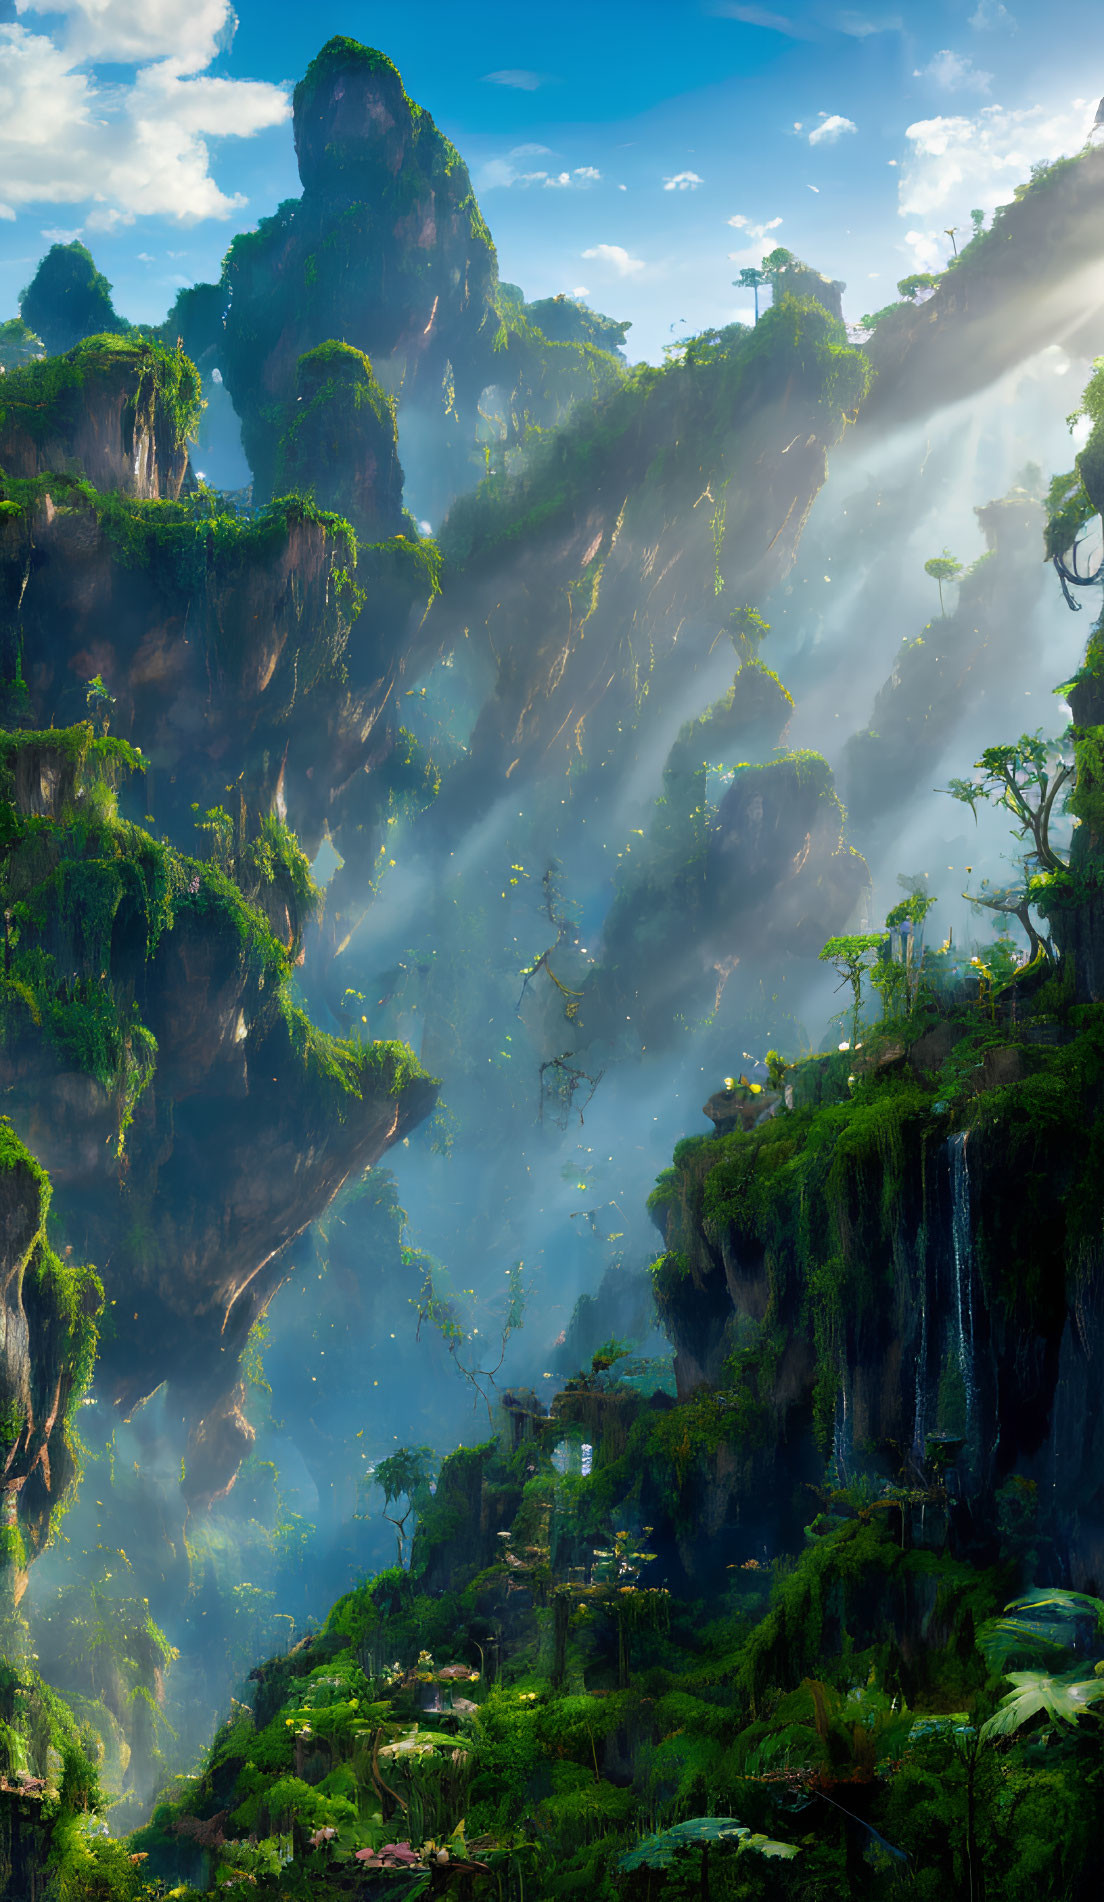 Mystical landscape with towering cliffs and waterfalls